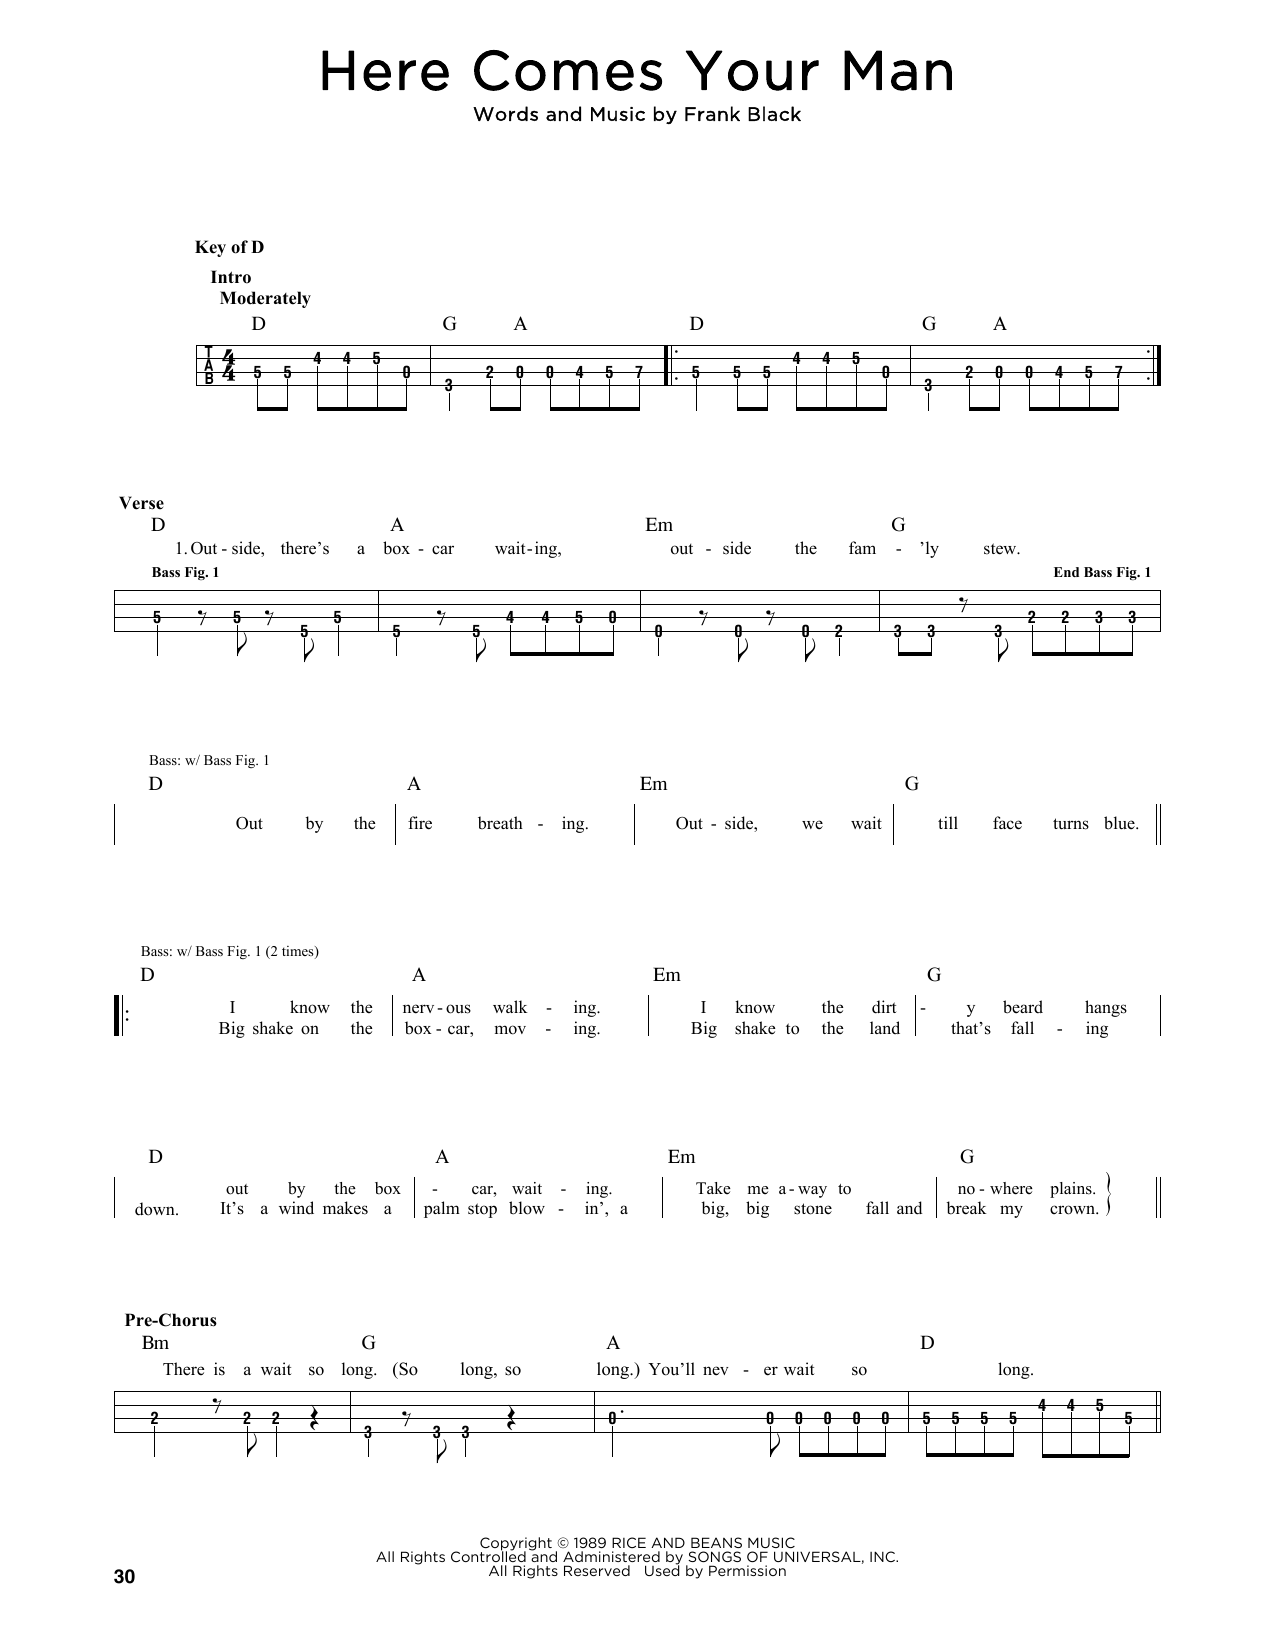 Download The Pixies Here Comes Your Man Sheet Music